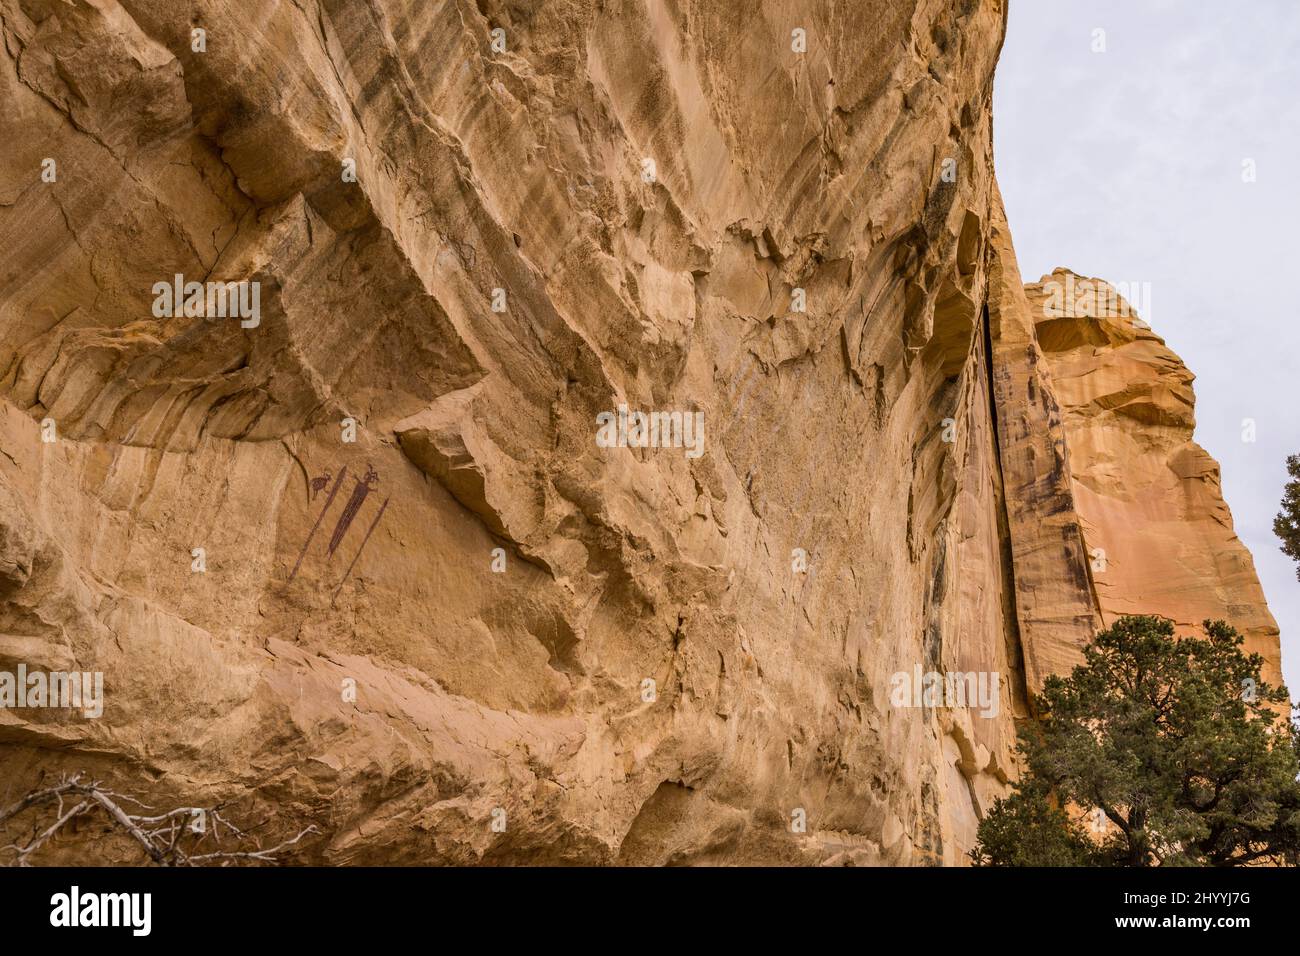 This Barrier Canyon-style rock art panel is found in the area of the San Rafael Swell in Utah known as the Head of Sinbad.  These pictographs were pai Stock Photo